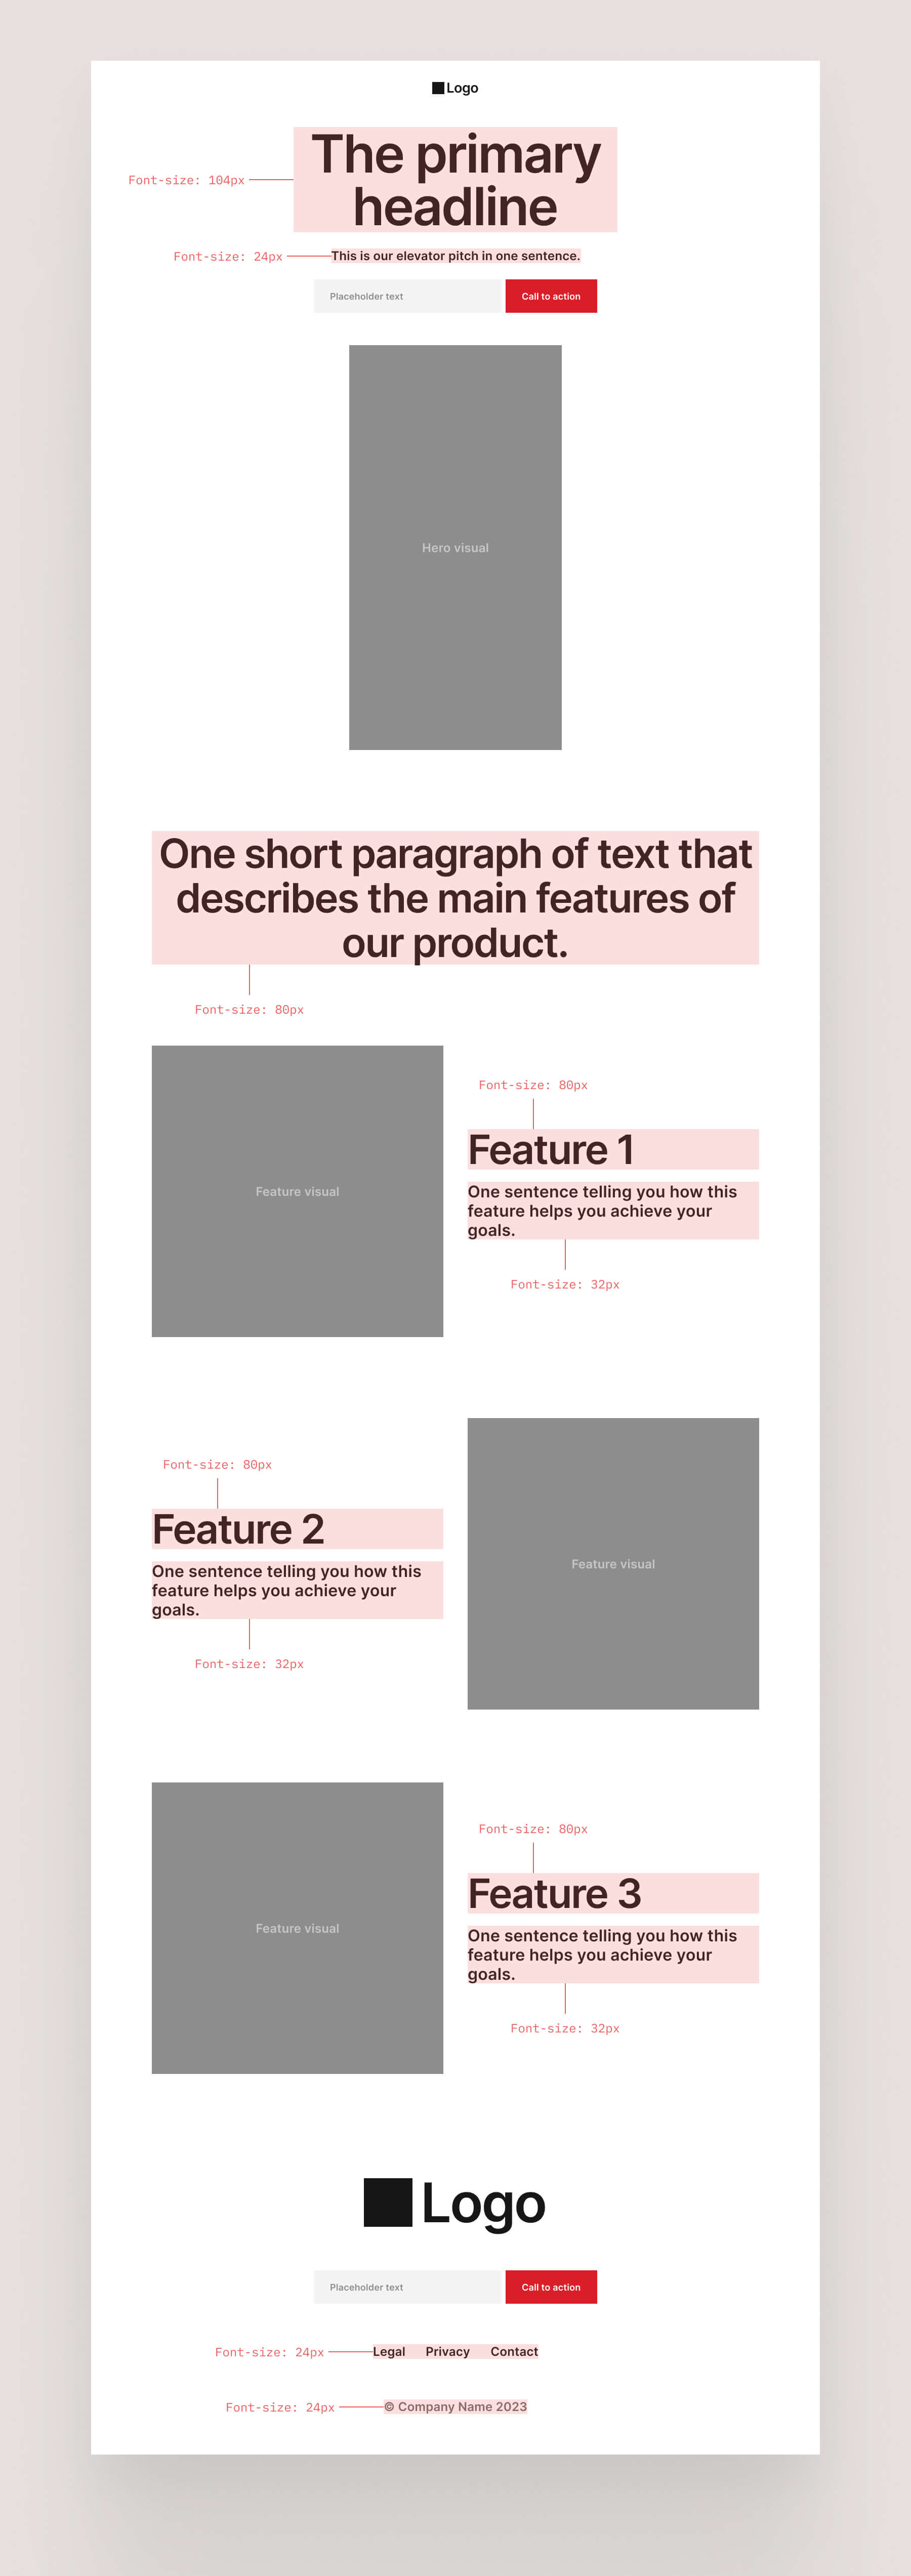 Wireframe of a minimal landing page with annotations for type sizes